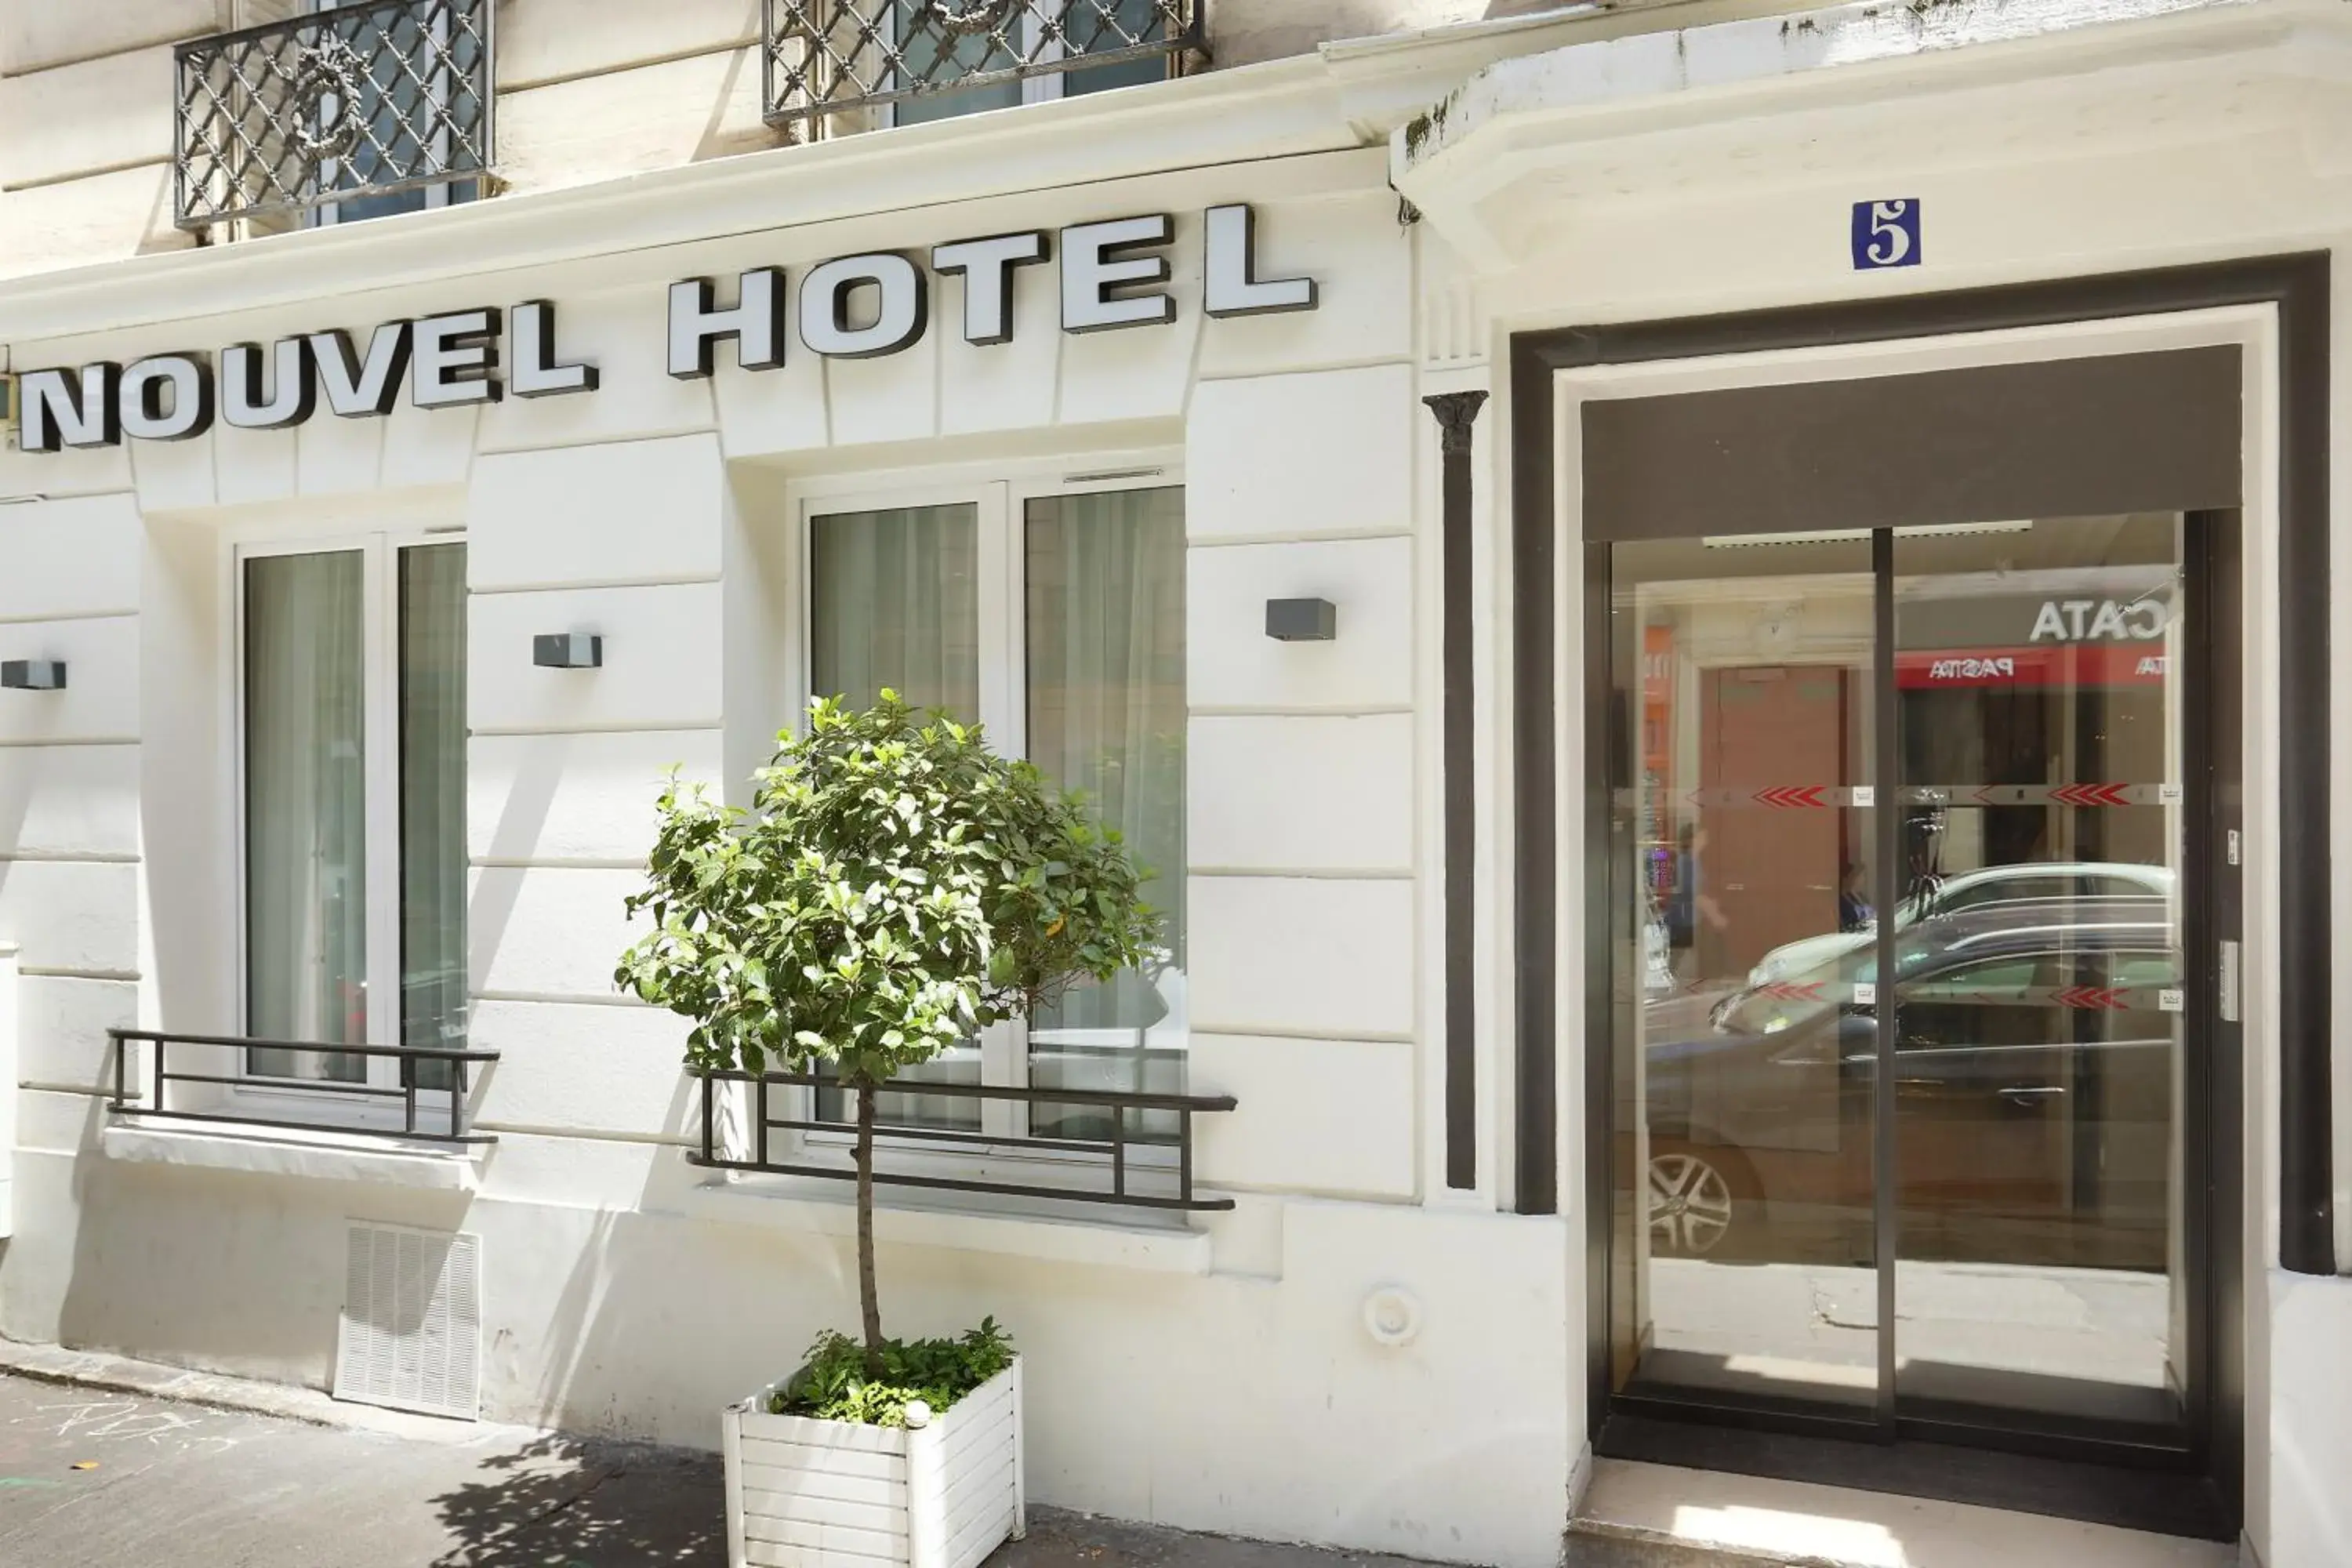 Property building in Nouvel Hotel Eiffel